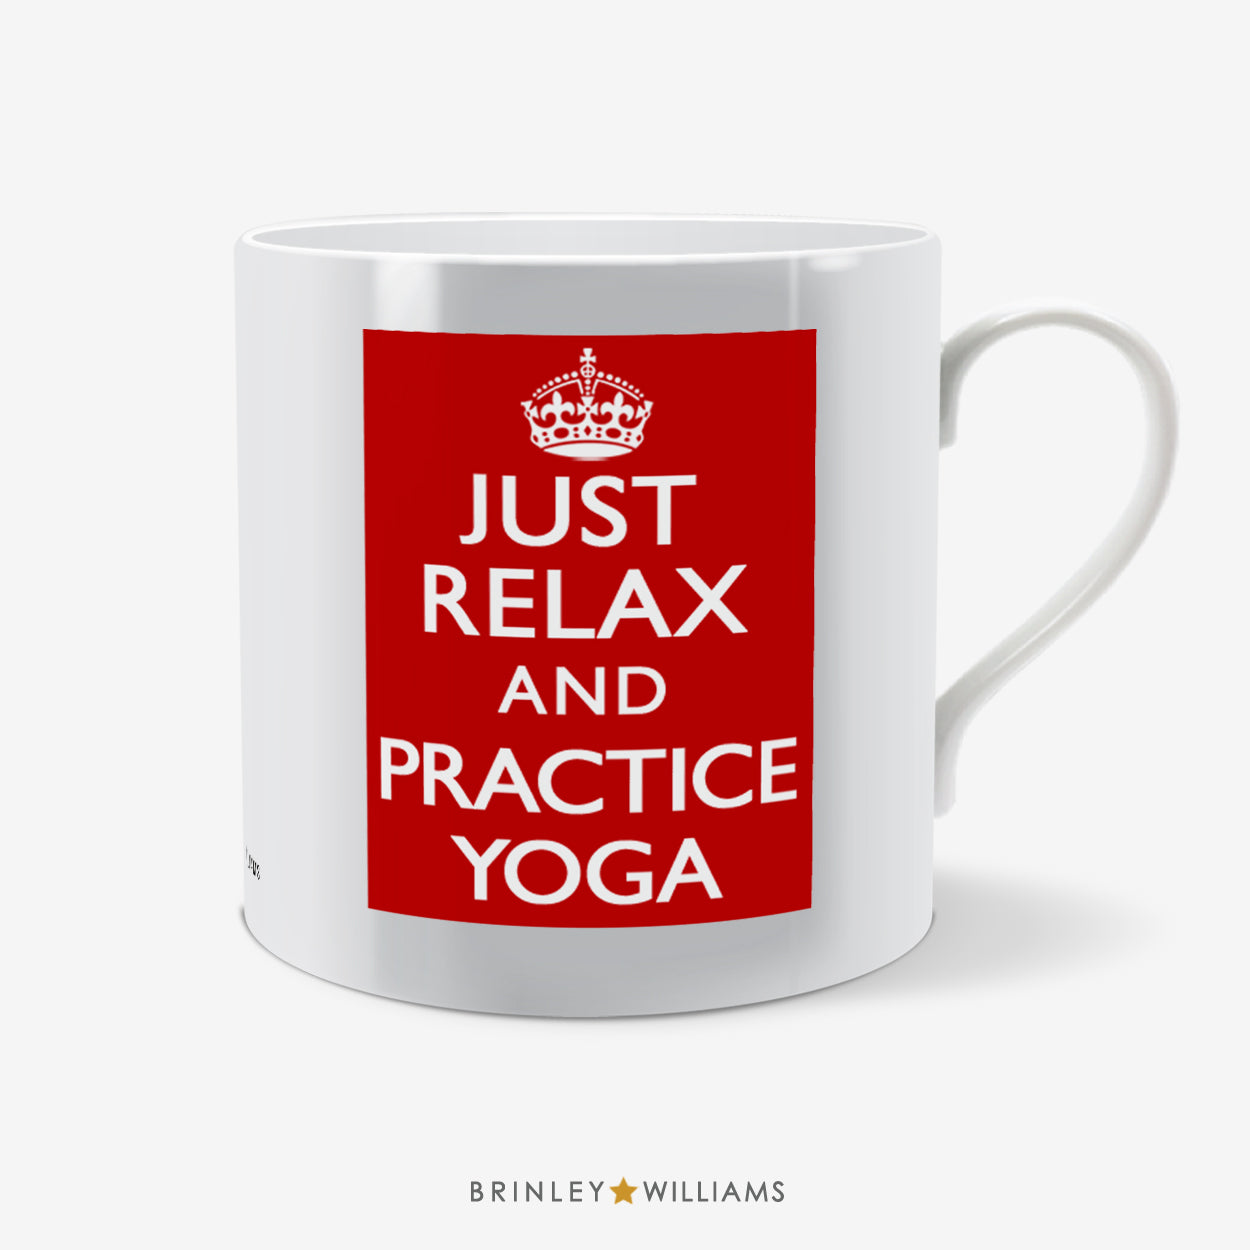 Just relax and practise Yoga Fun Mug - Red